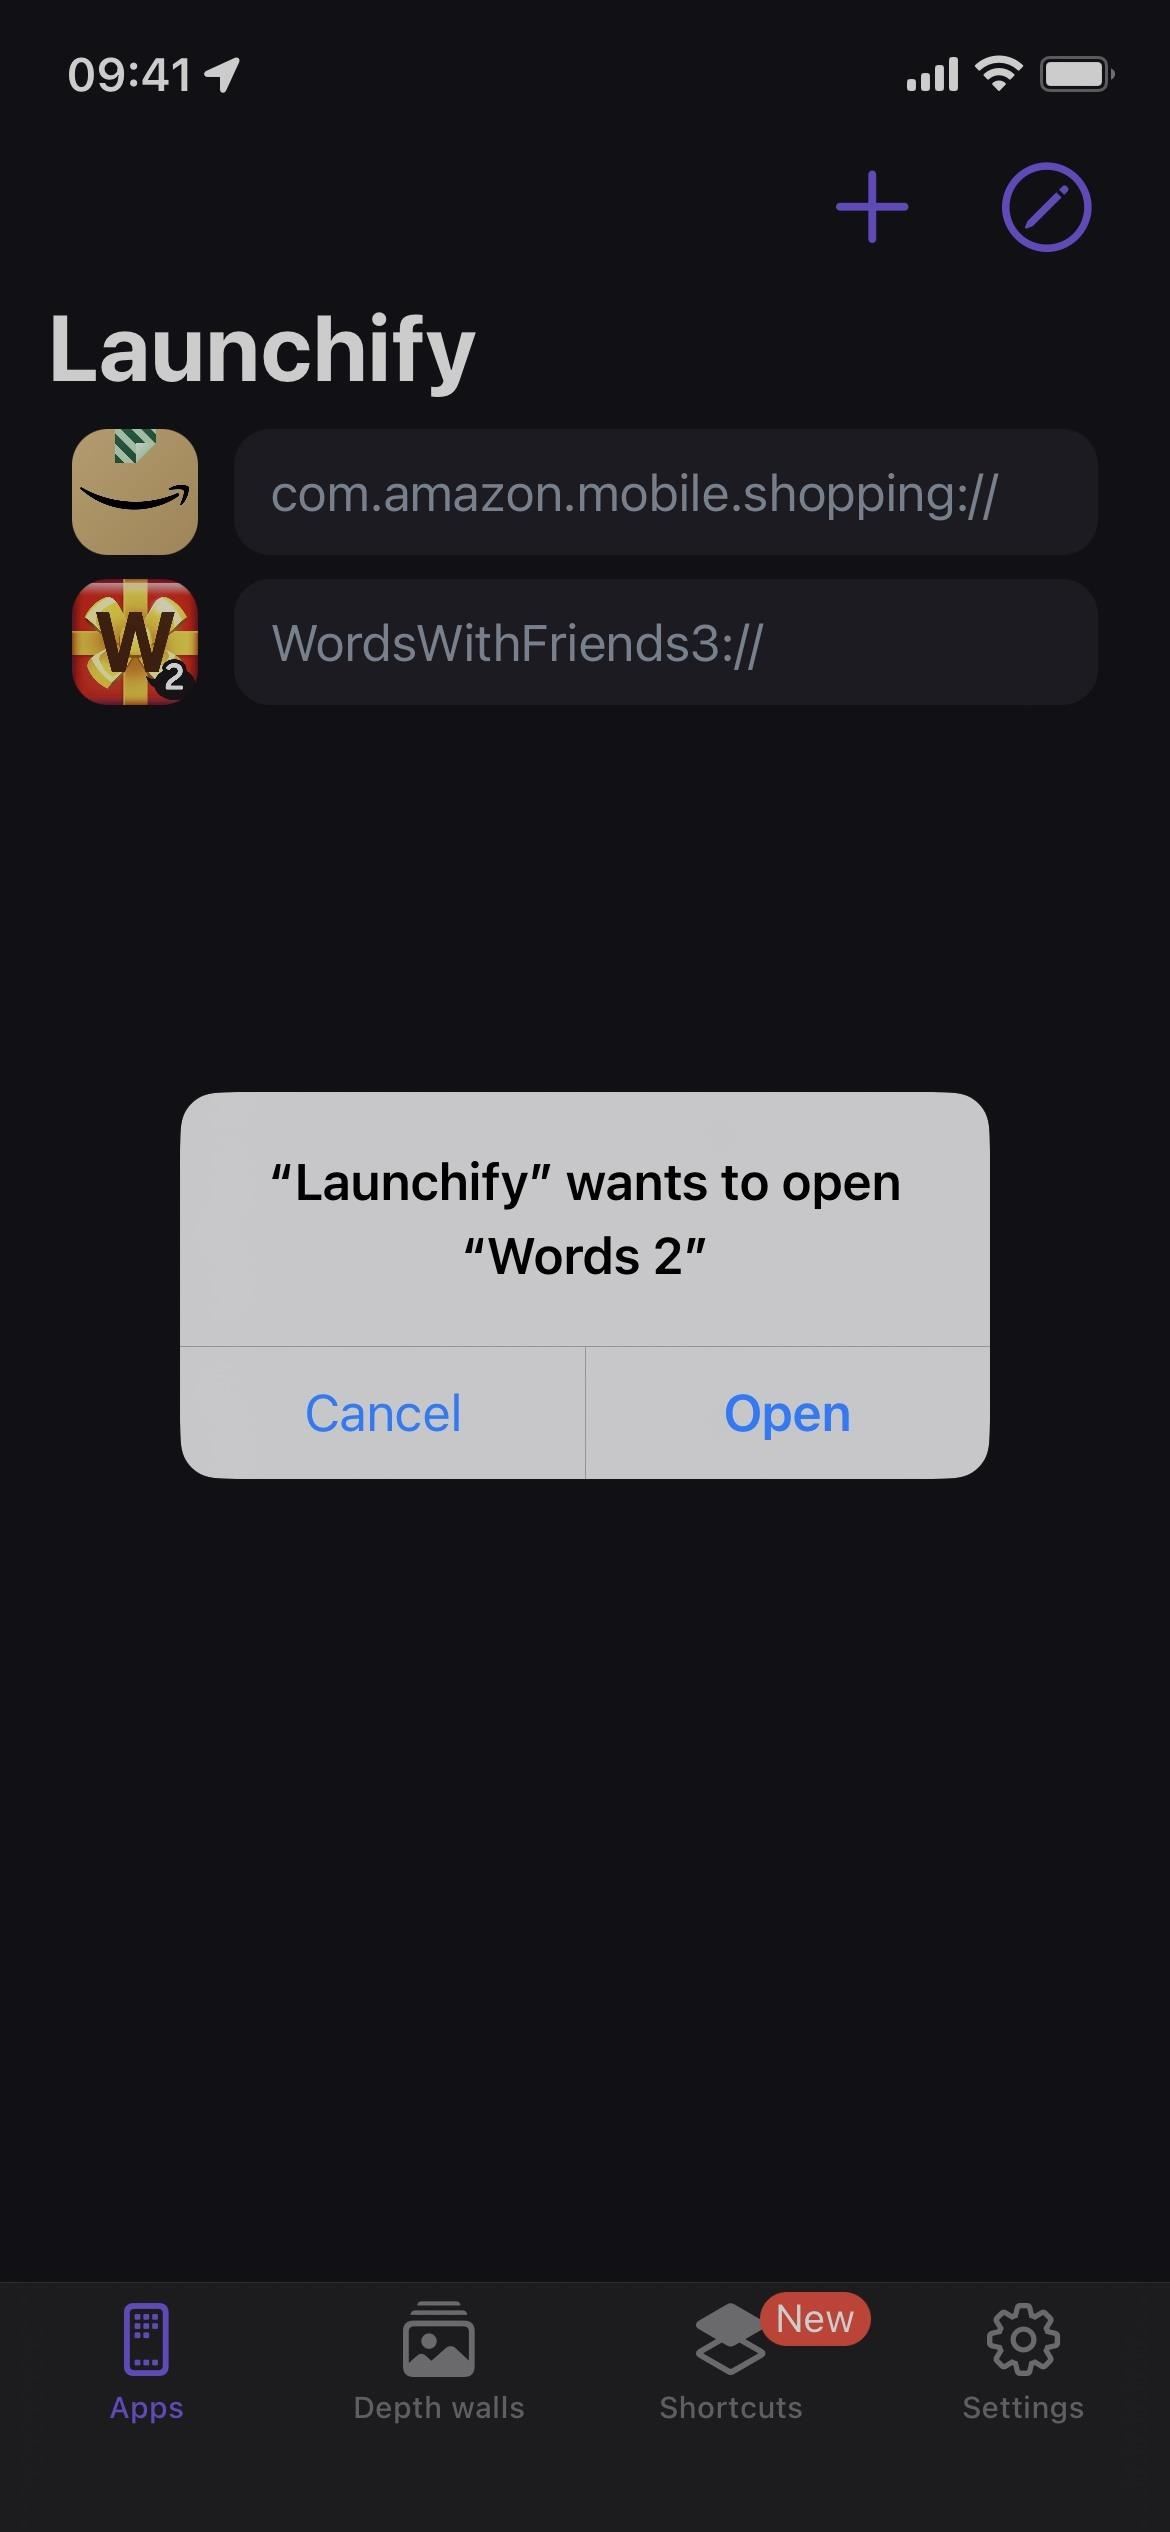 Open Any App Instantly from Your iPhone's Lock Screen